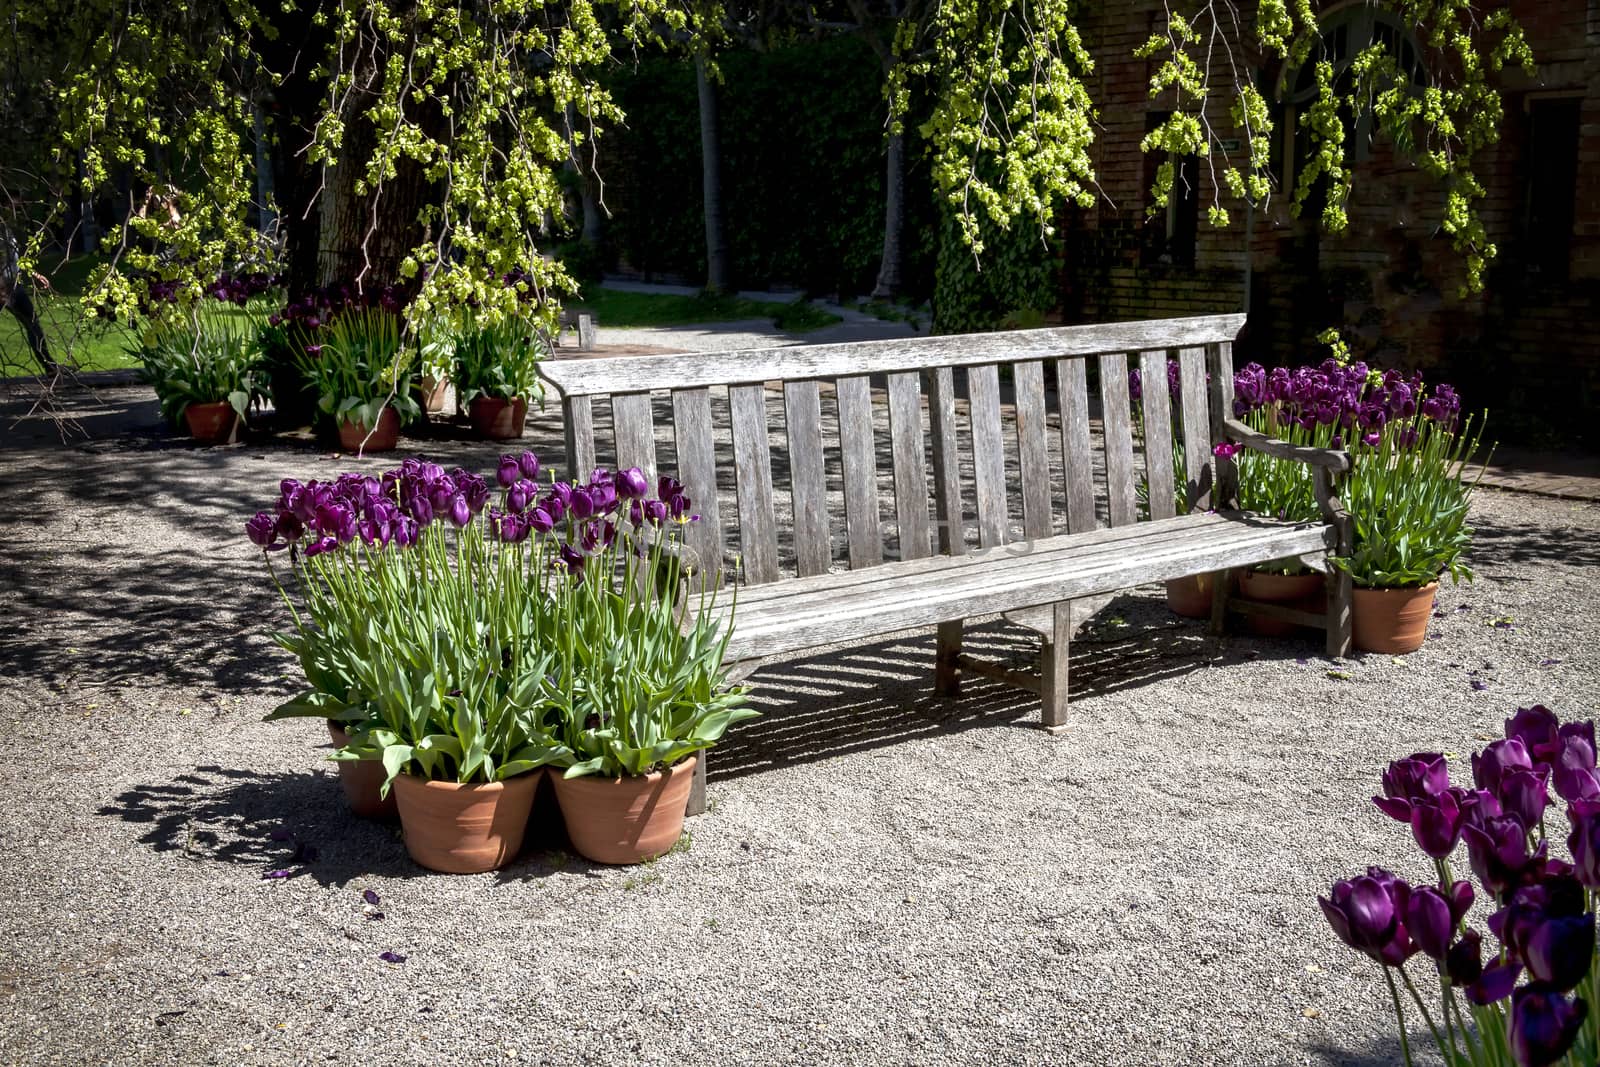 This bench is located in a formal botanical garden. The garden featured freshly blooming purple tulips which can be found throughout the park.